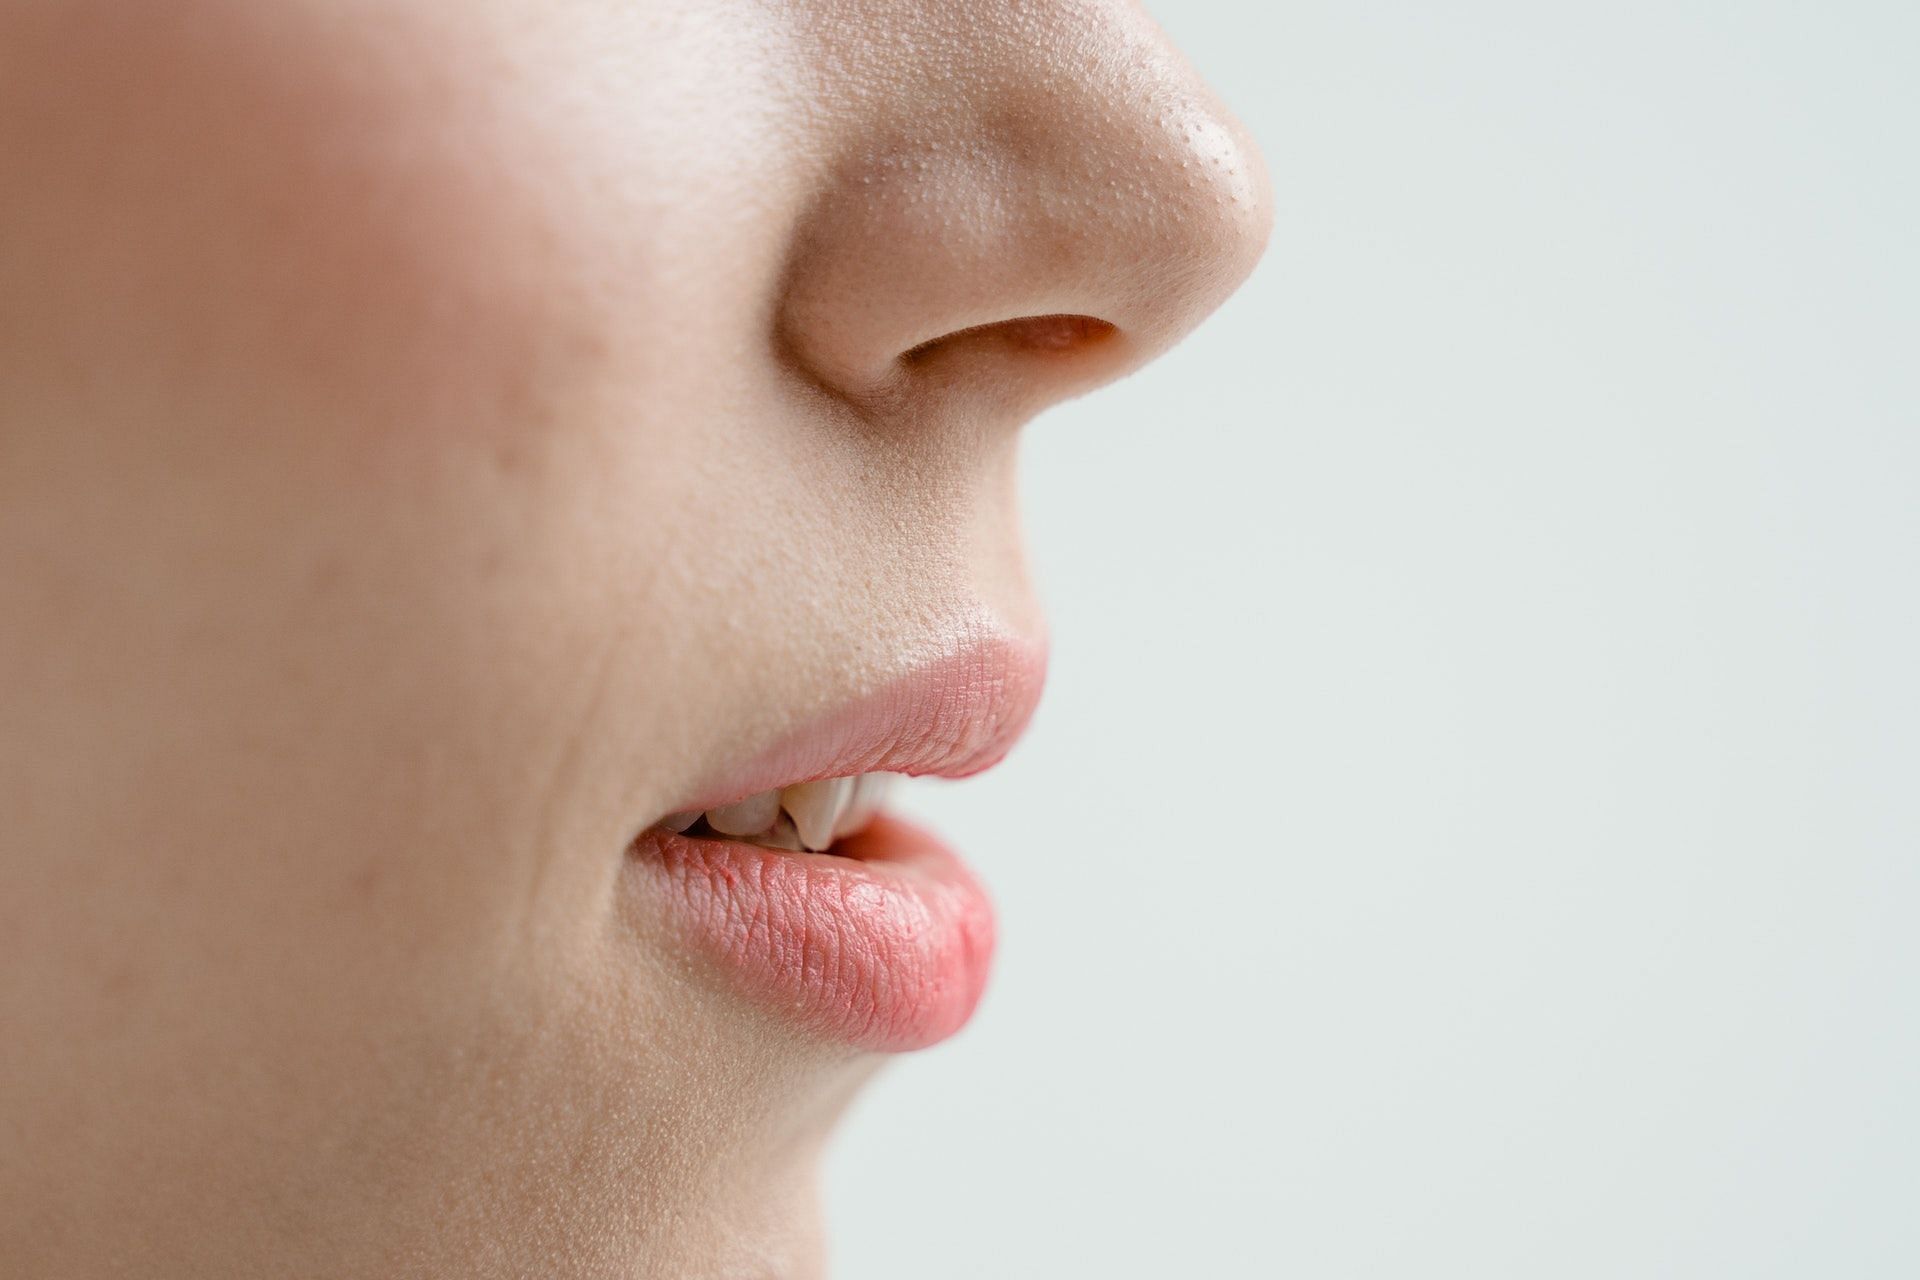 Bump on the lip can be caused due to several reasons. (Photo via Pexels/MART  PRODUCTION)